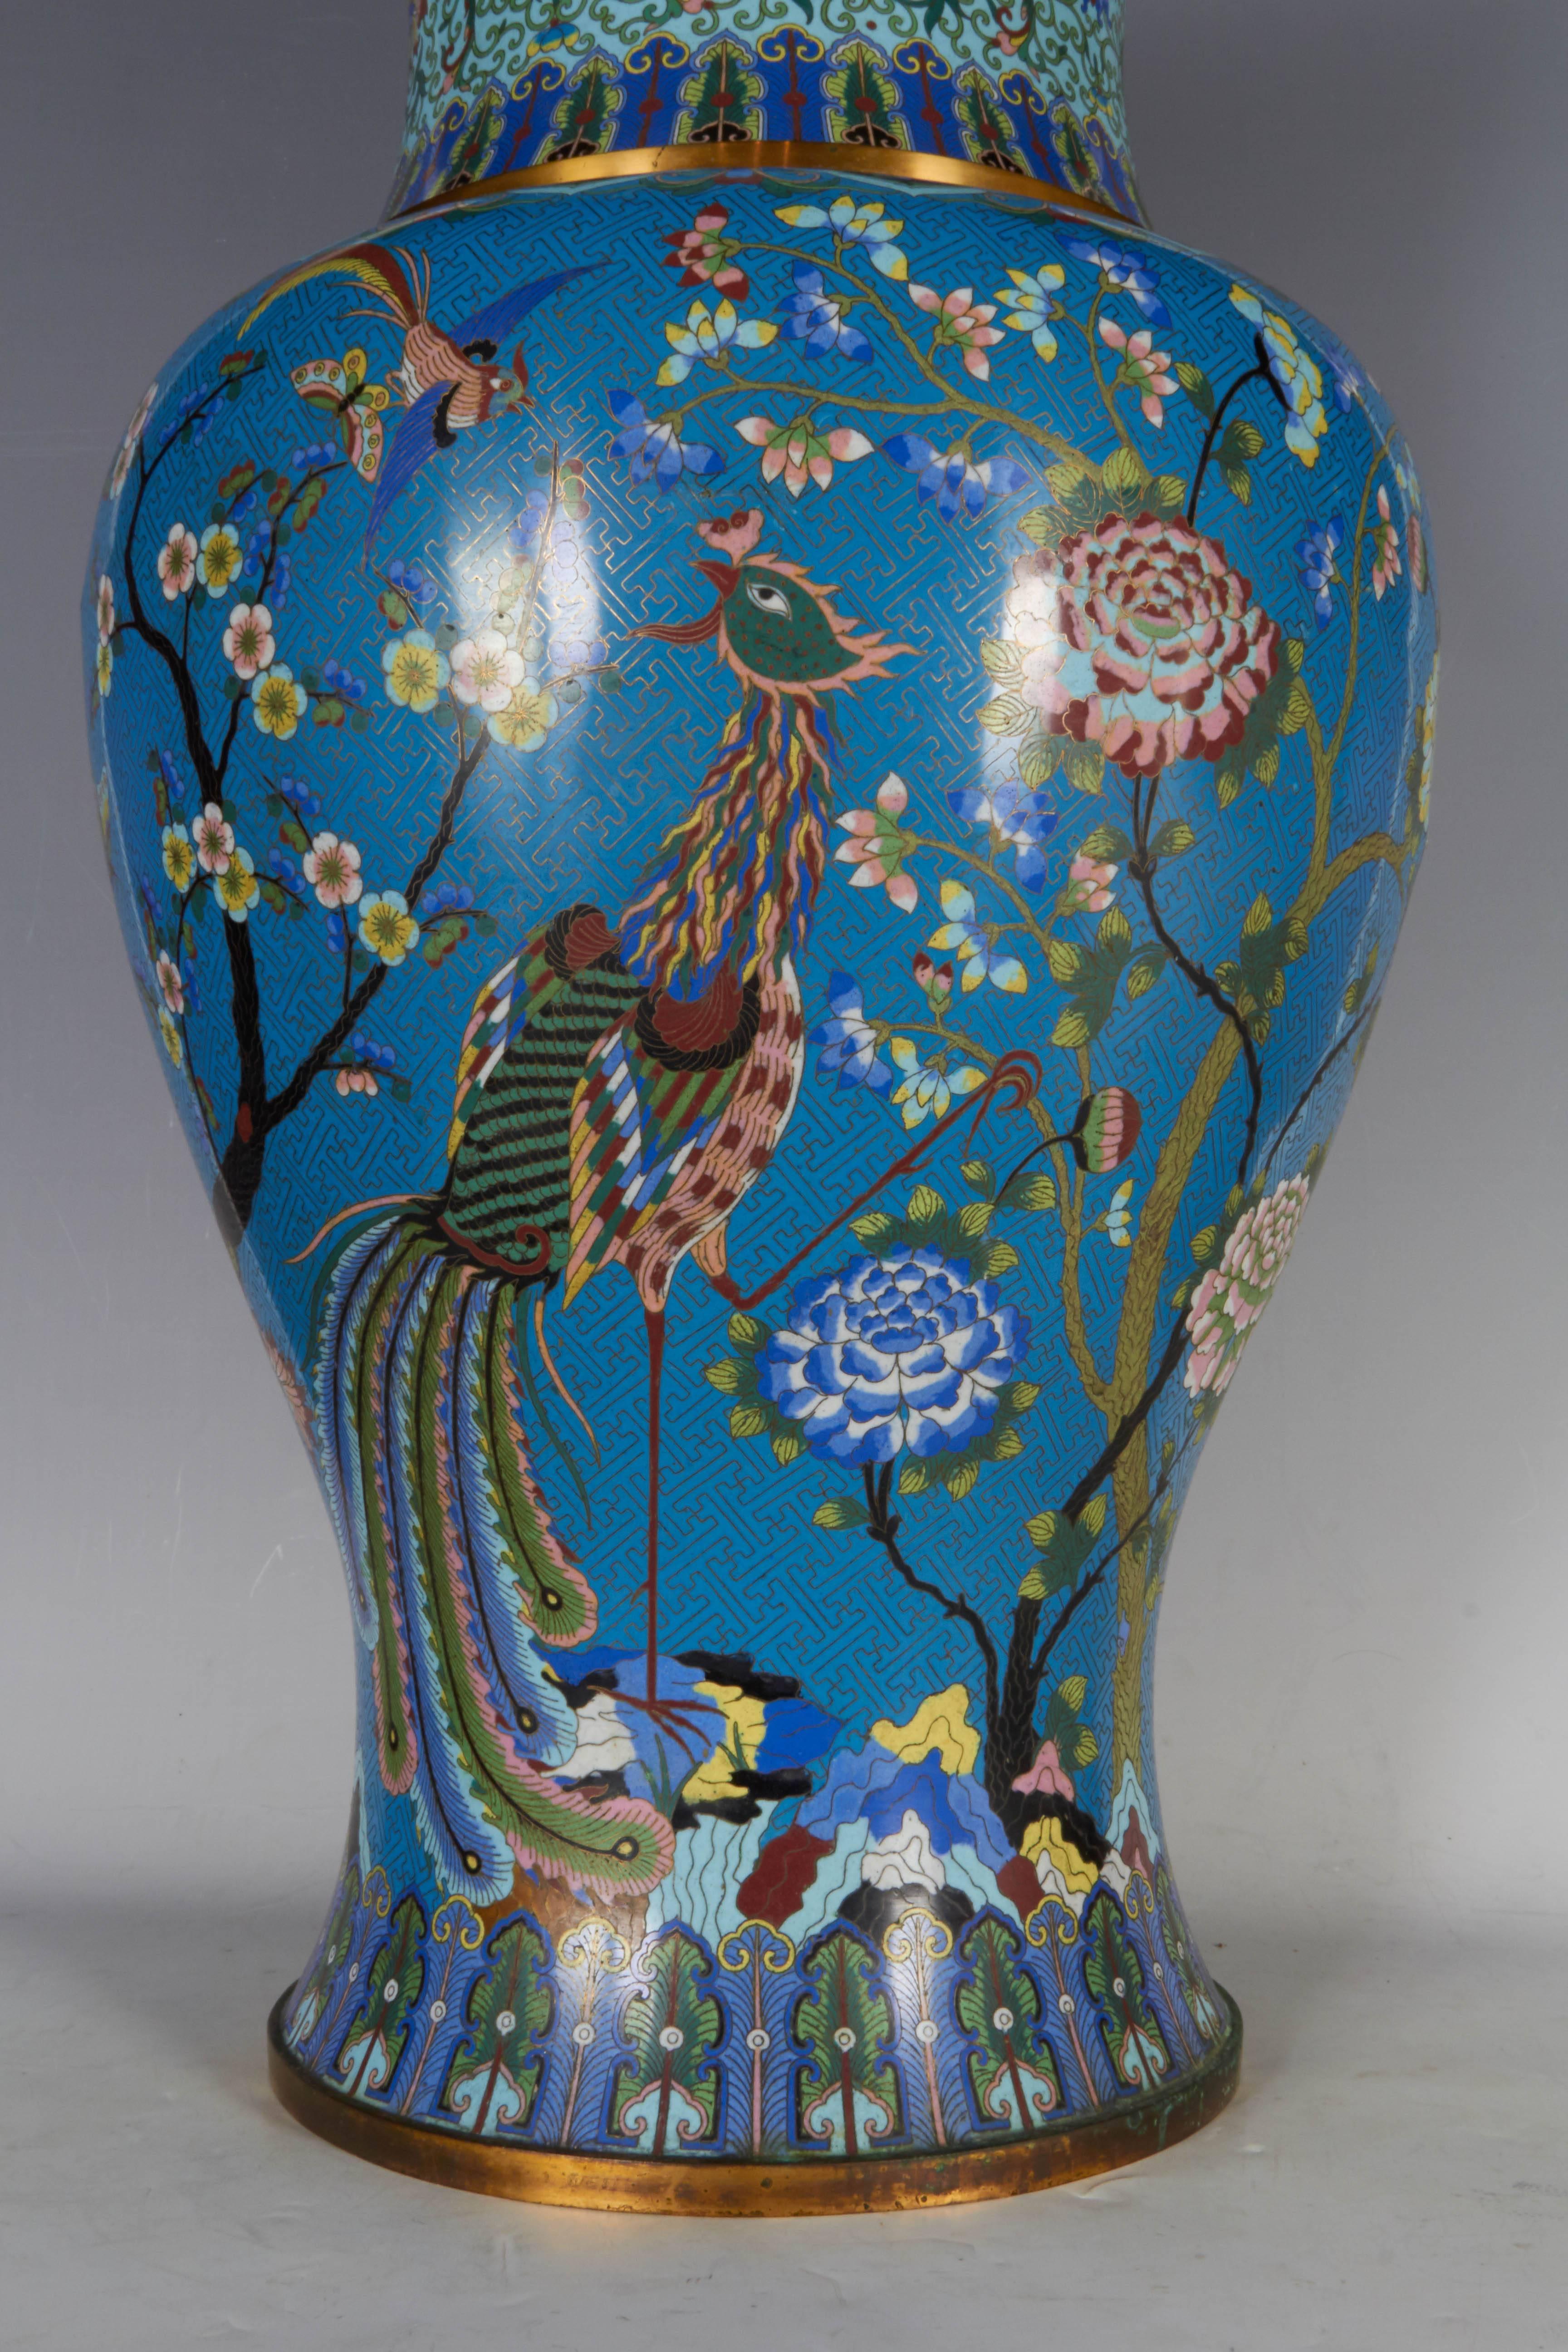 A massive Chinese blue cloisonné vase or urn depicting a colorful imperial phoenix with gilt bronze wires among birds and butterflies in an imperial garden of magnolia blossoms, chrysanthemums, with stems and leaves on a celest blue enamel